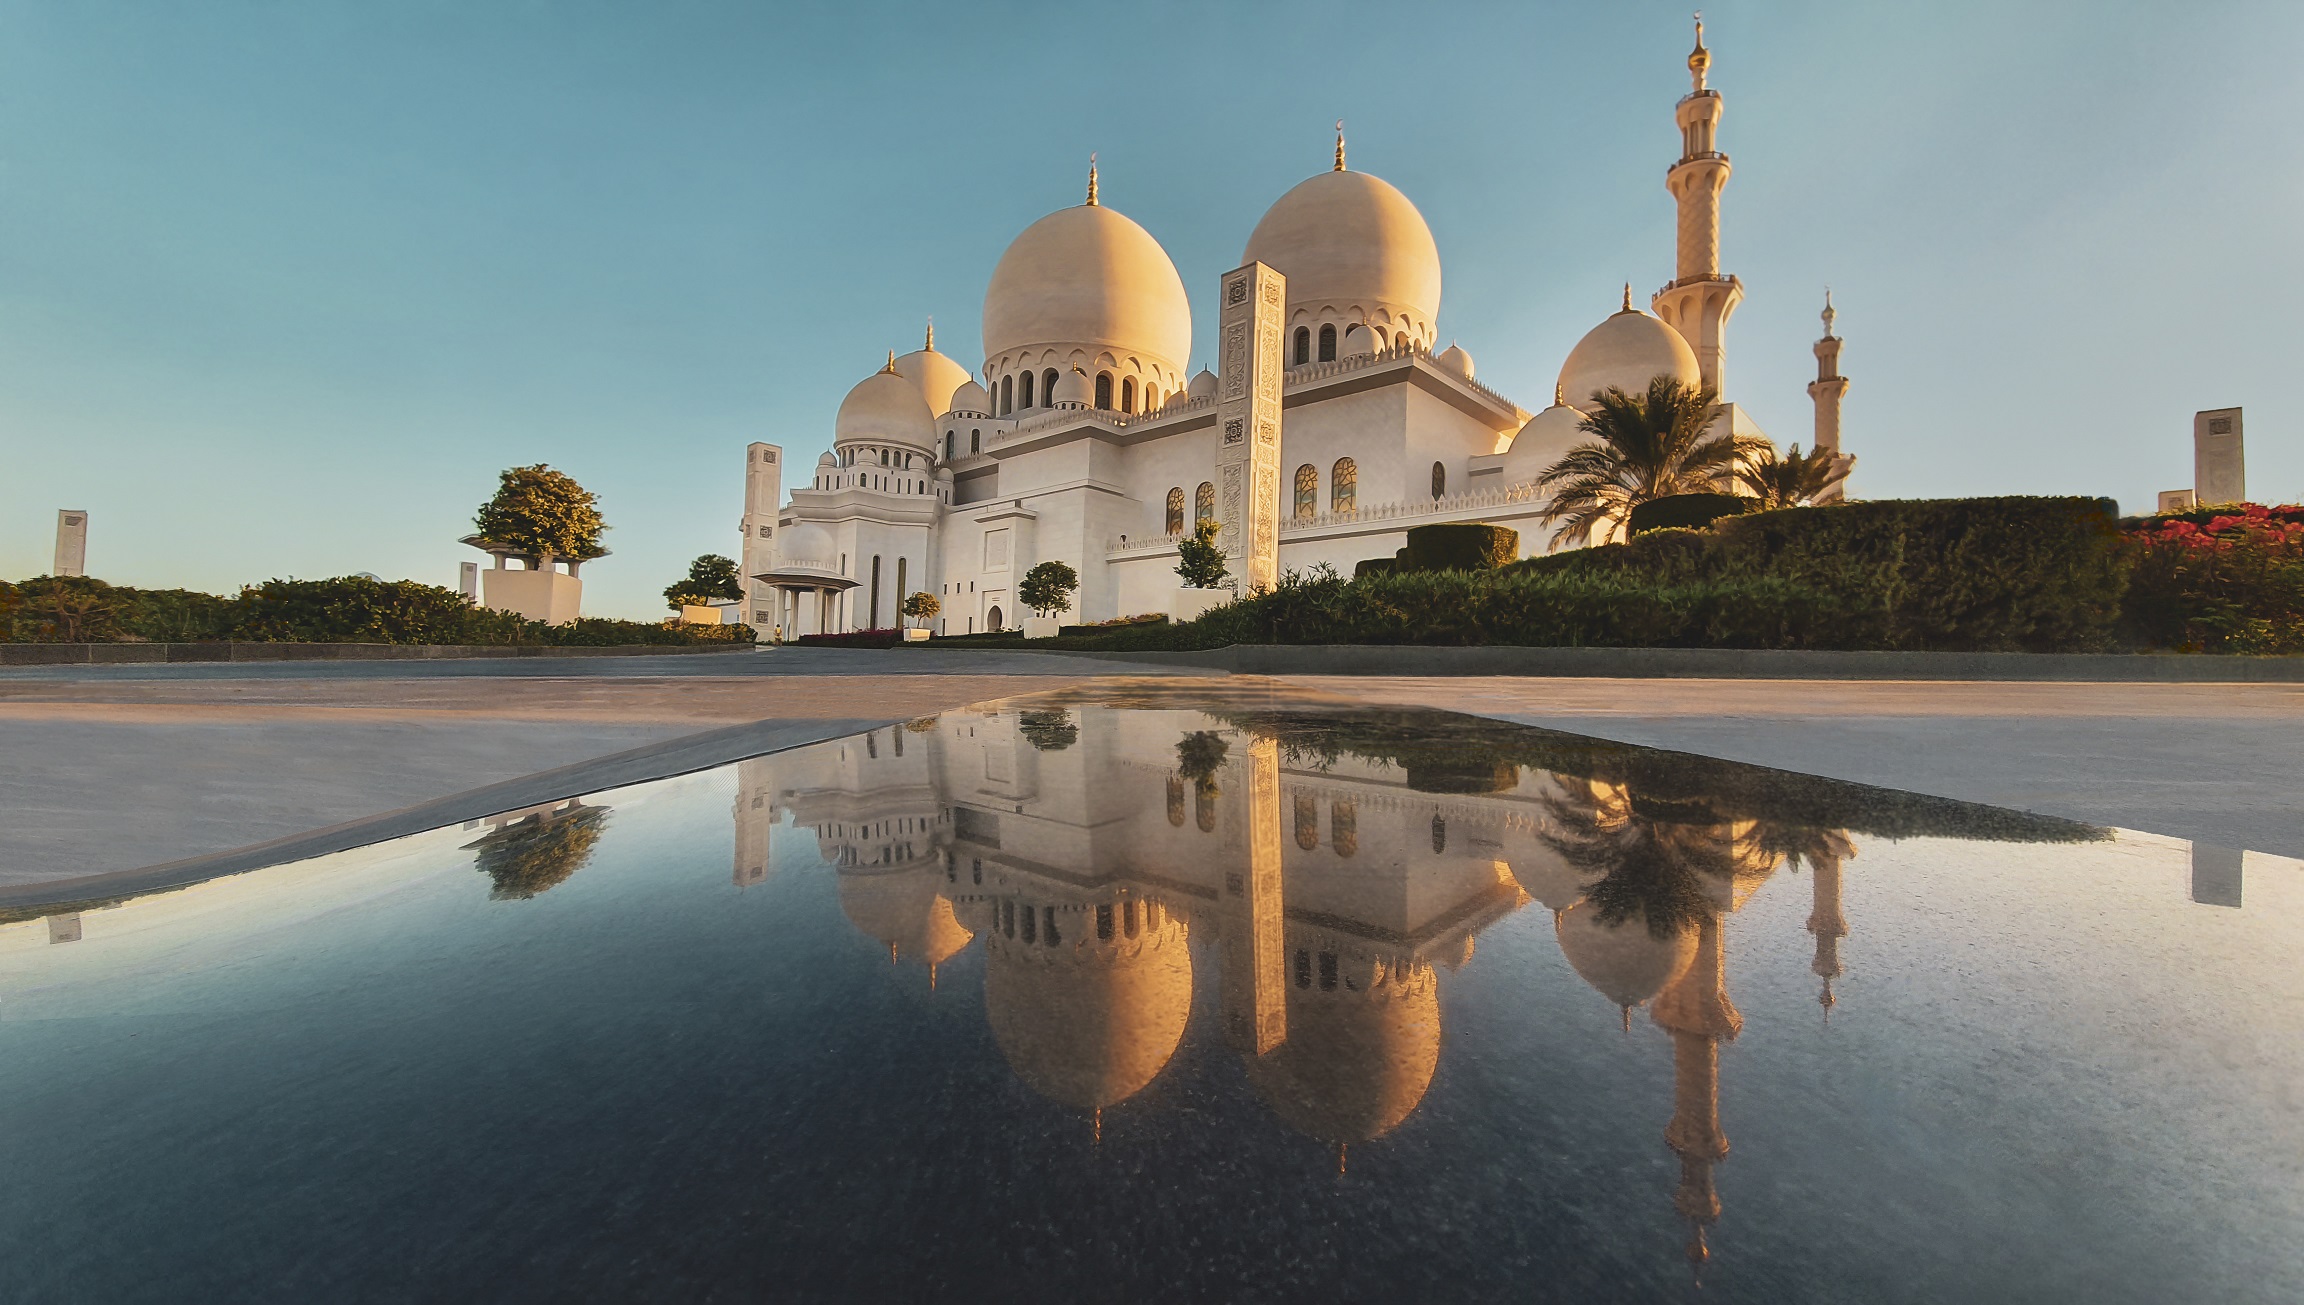 Sheikh Zayed Grand Mosque In Abu Dhabi Receives 11,614 Worshippers And Visitors During Eid Al Adha Break